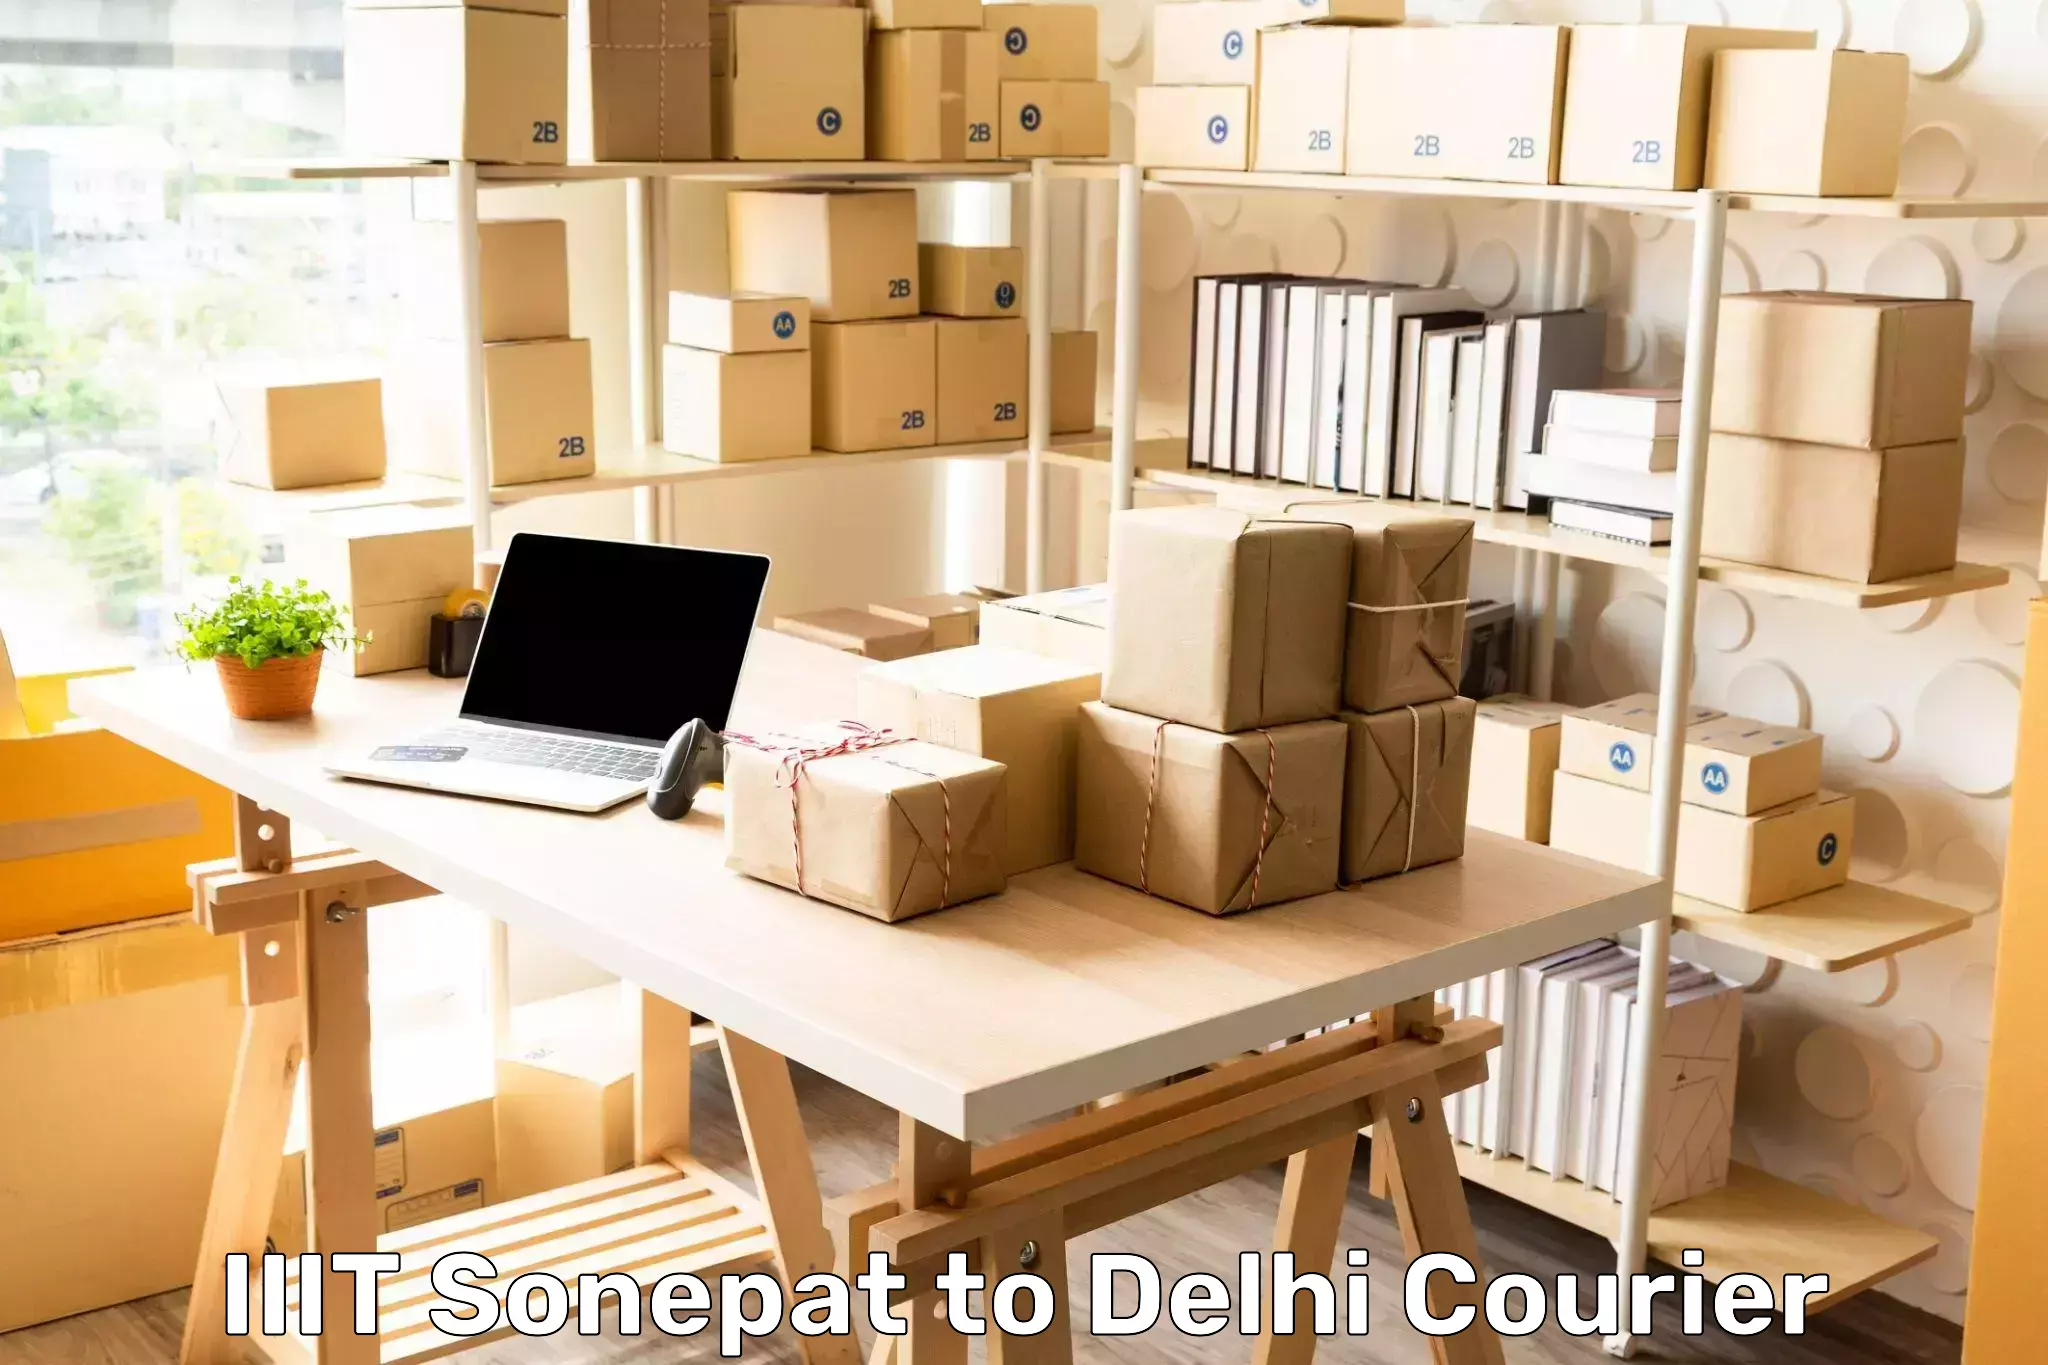 Affordable shipping rates IIIT Sonepat to Indraprastha